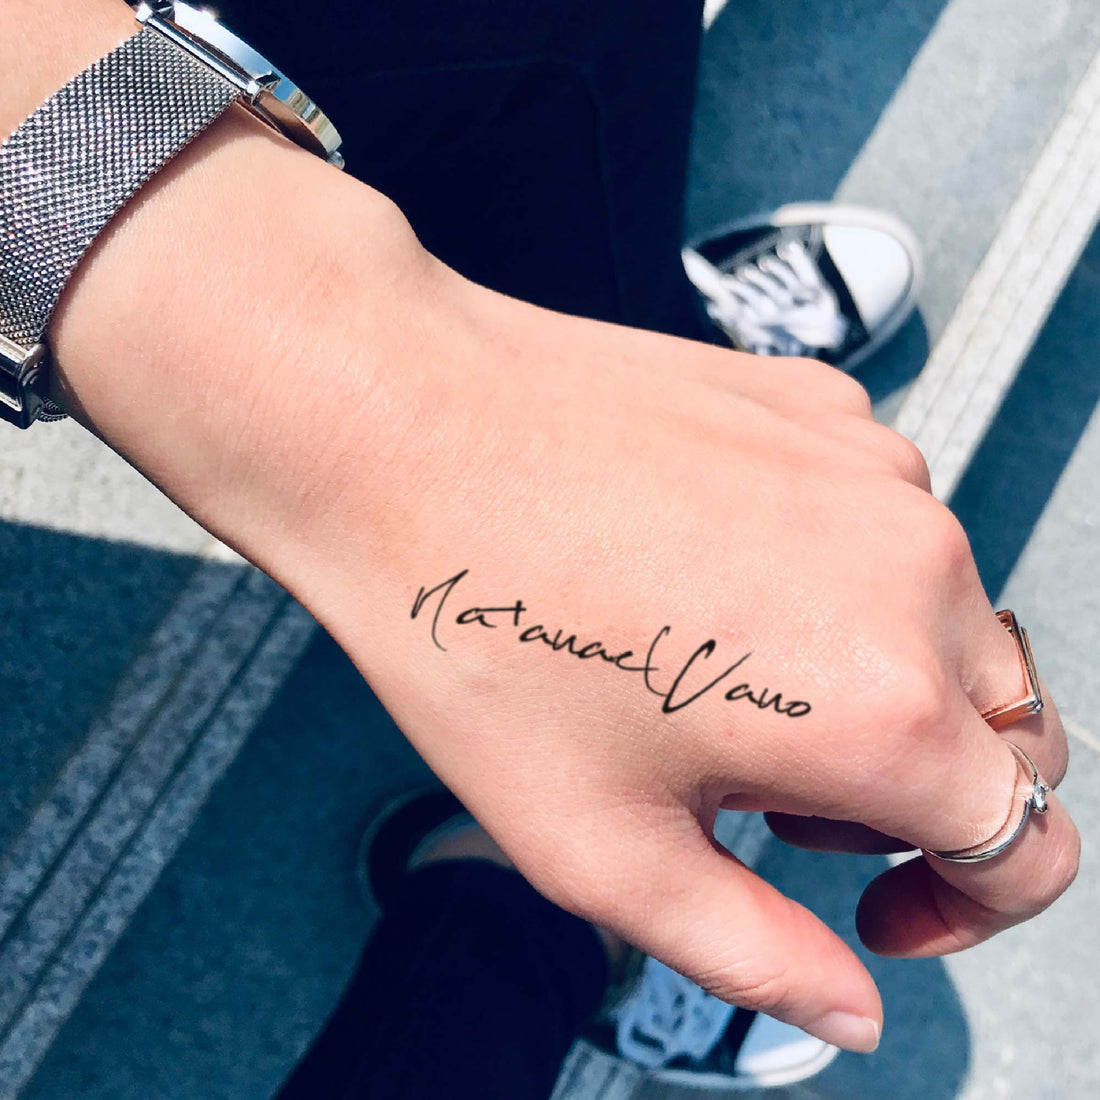 Natanael Cano custom temporary tattoo sticker design idea inspiration meanings removal arm wrist hand words font name signature calligraphy lyrics tour concert outfits merch accessory gift souvenir costumes wear dress up code